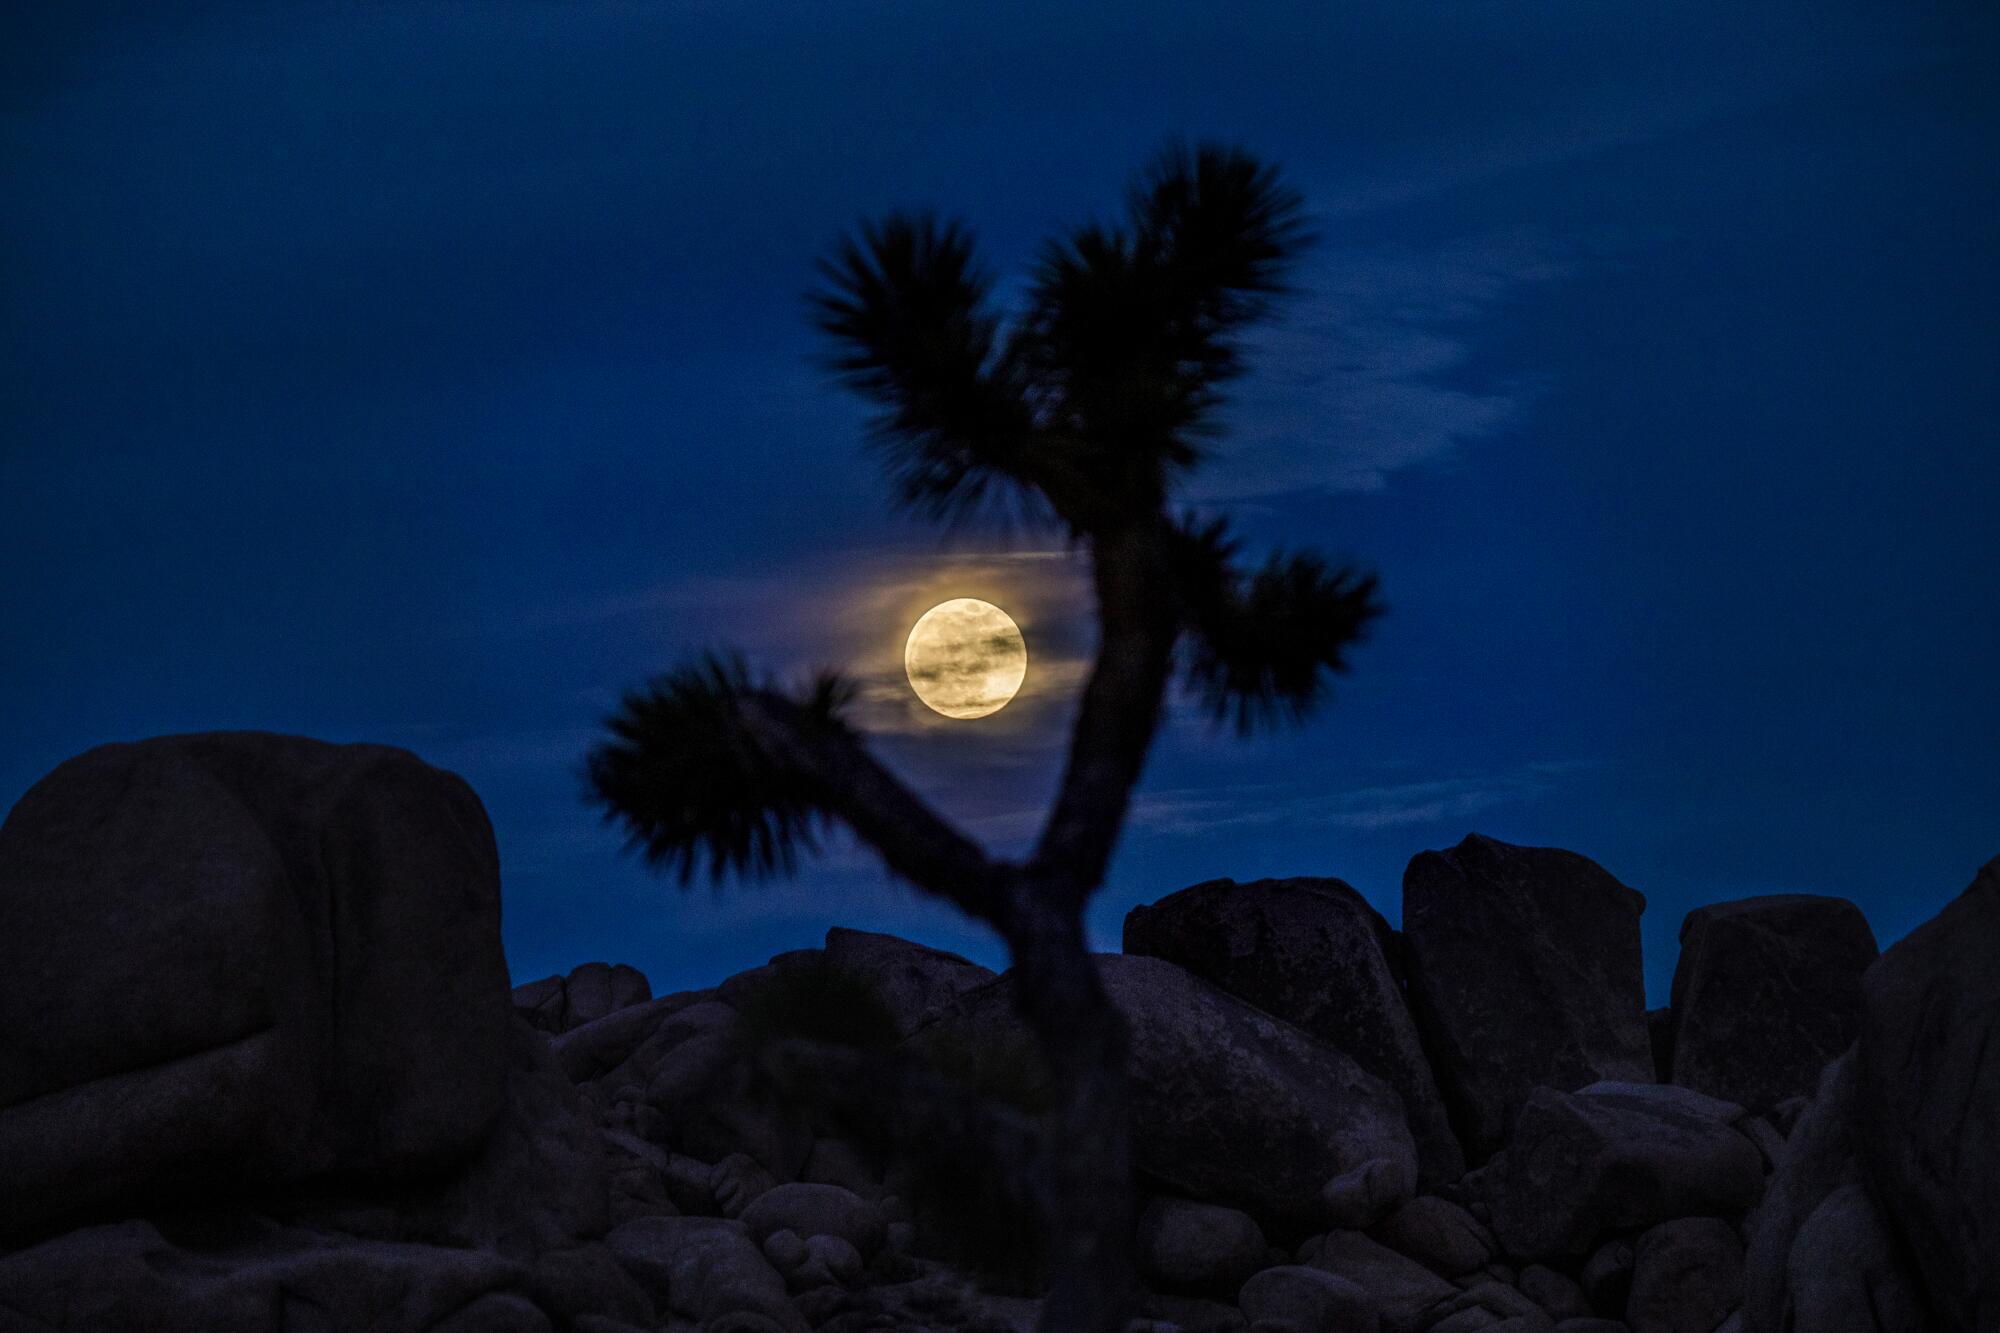 A full moon is framed by the branches of a Joshua tree.